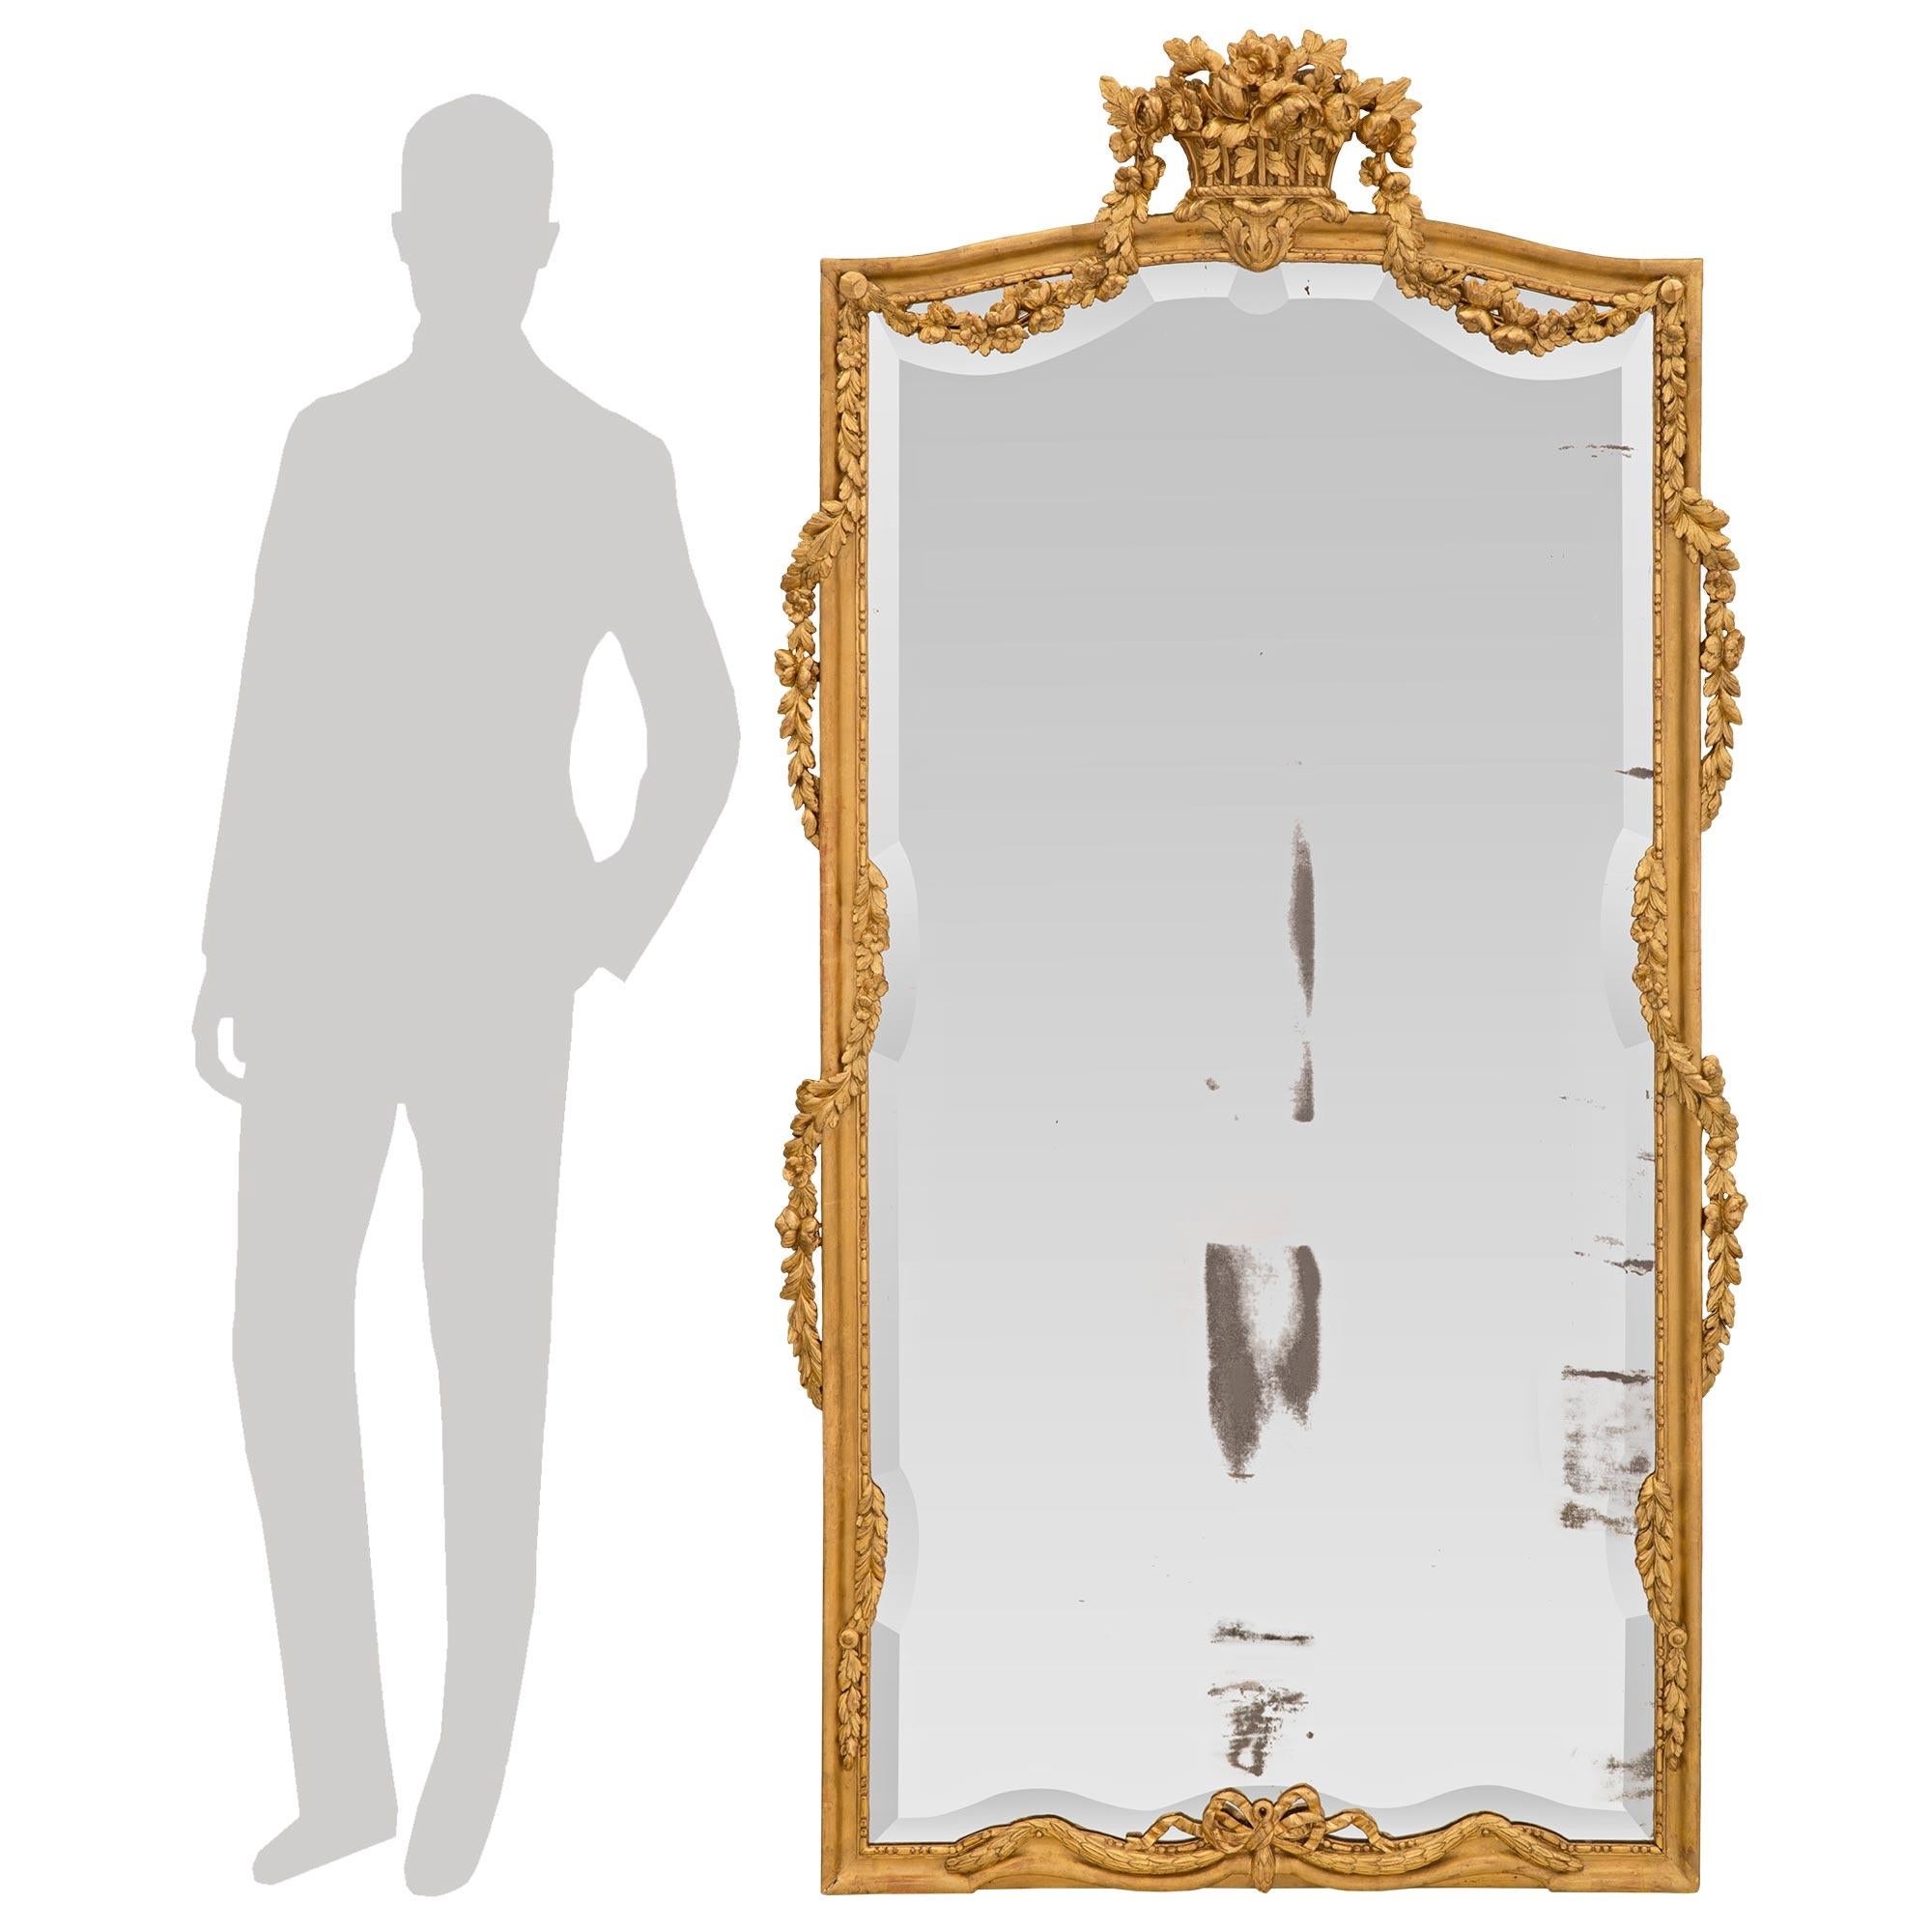 A most elegant and unique French 19th century Louis XVI st. giltwood mirror. The mirror retains its original mirror plate with an exceptional and wonderfully executed beveled border following the beautiful shape of the giltwood frame. The frame